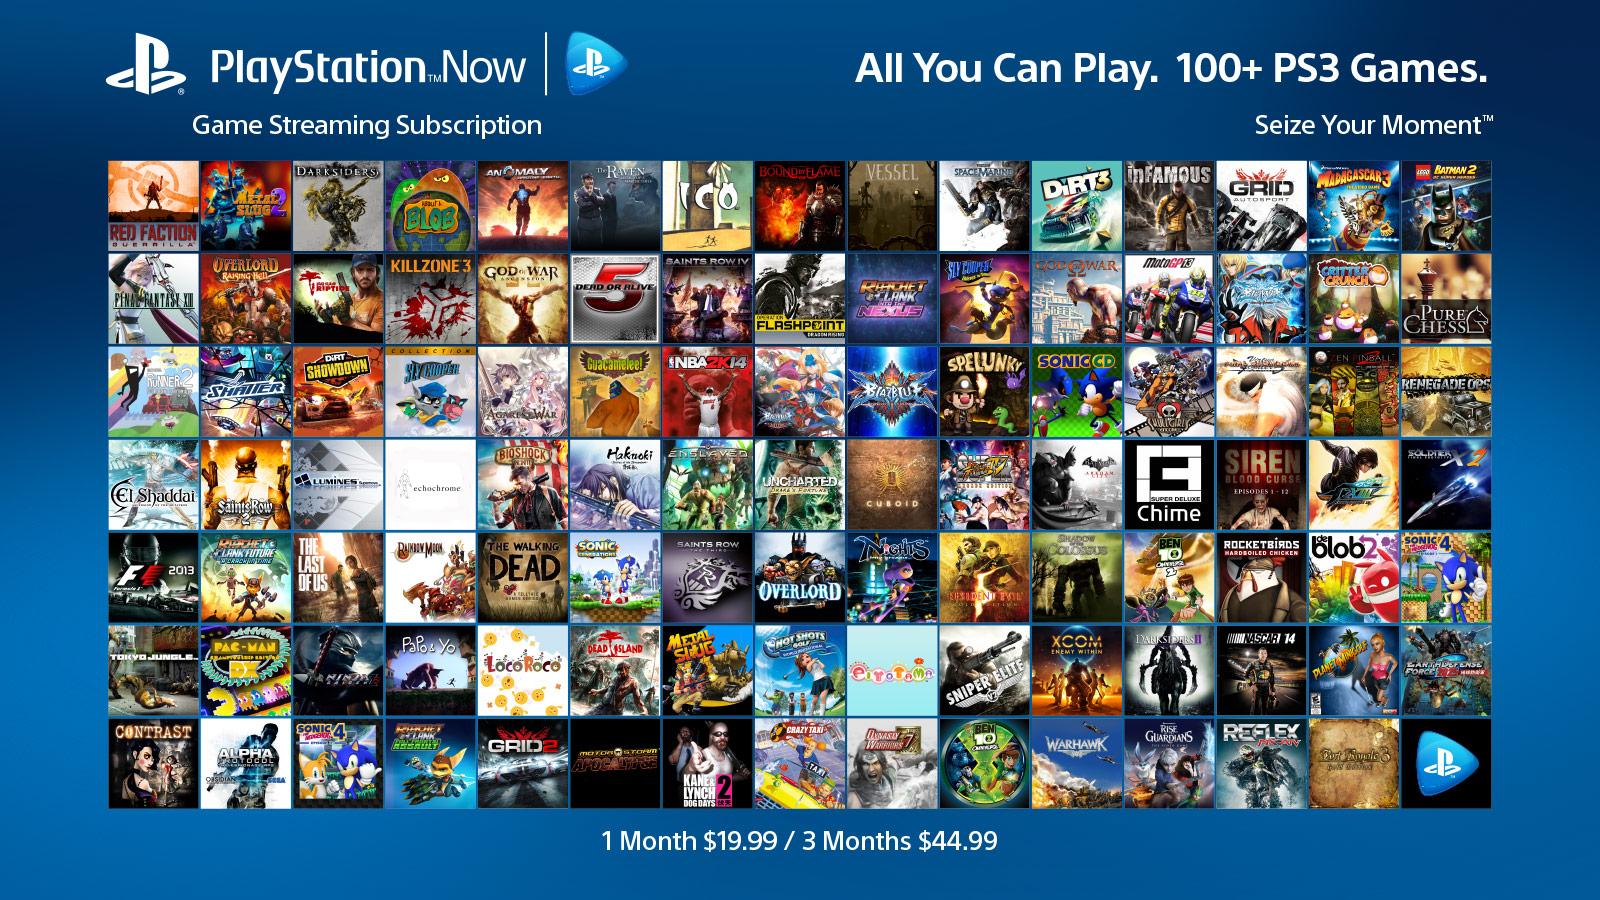 PlayStation on Twitter: "PlayStation Now subscription service January 13th. games available. Details: http://t.co/oFFrIcvutT / Twitter